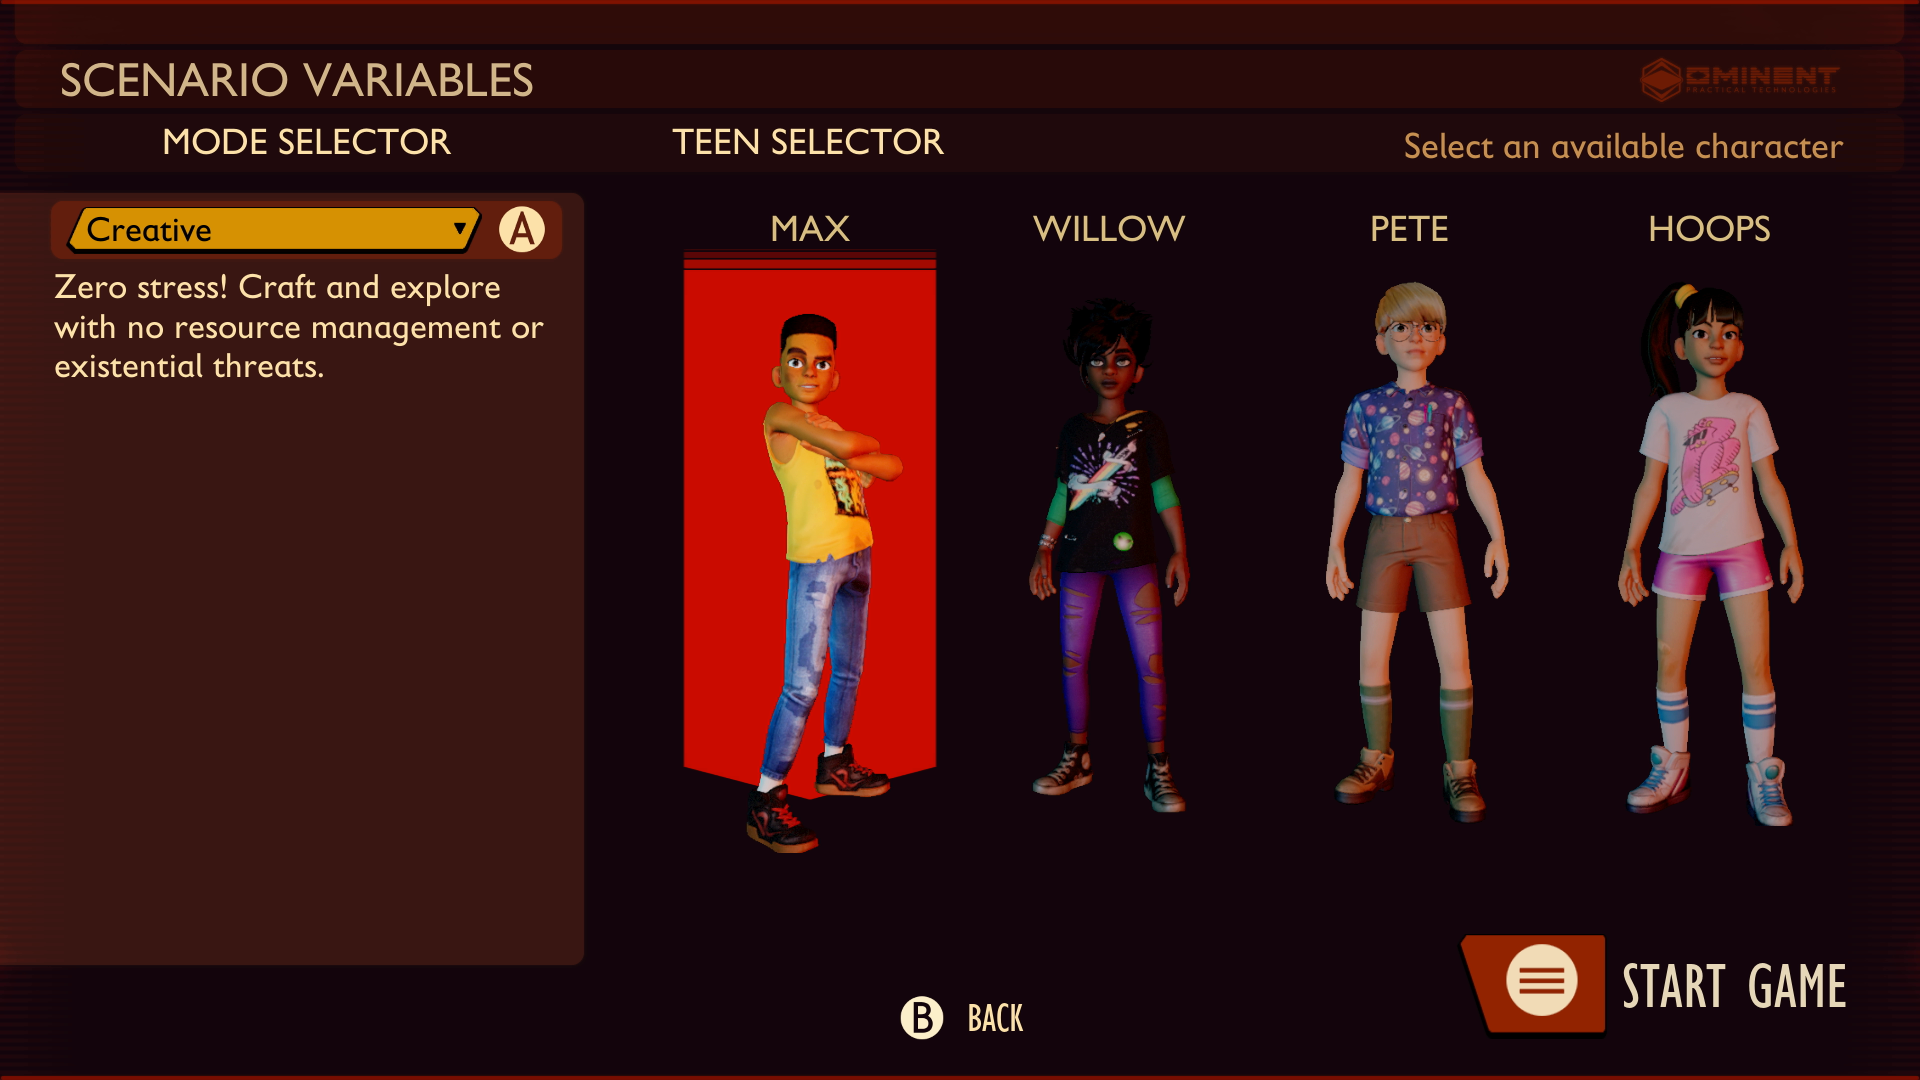 A screenshot of the Grounded "scenario variables" menu where the player can select a teen and a mode. The player has selected Max and Creative mode. The description of Creative mode is "Zero stress! Craft and explore with no resource management or existential threats."